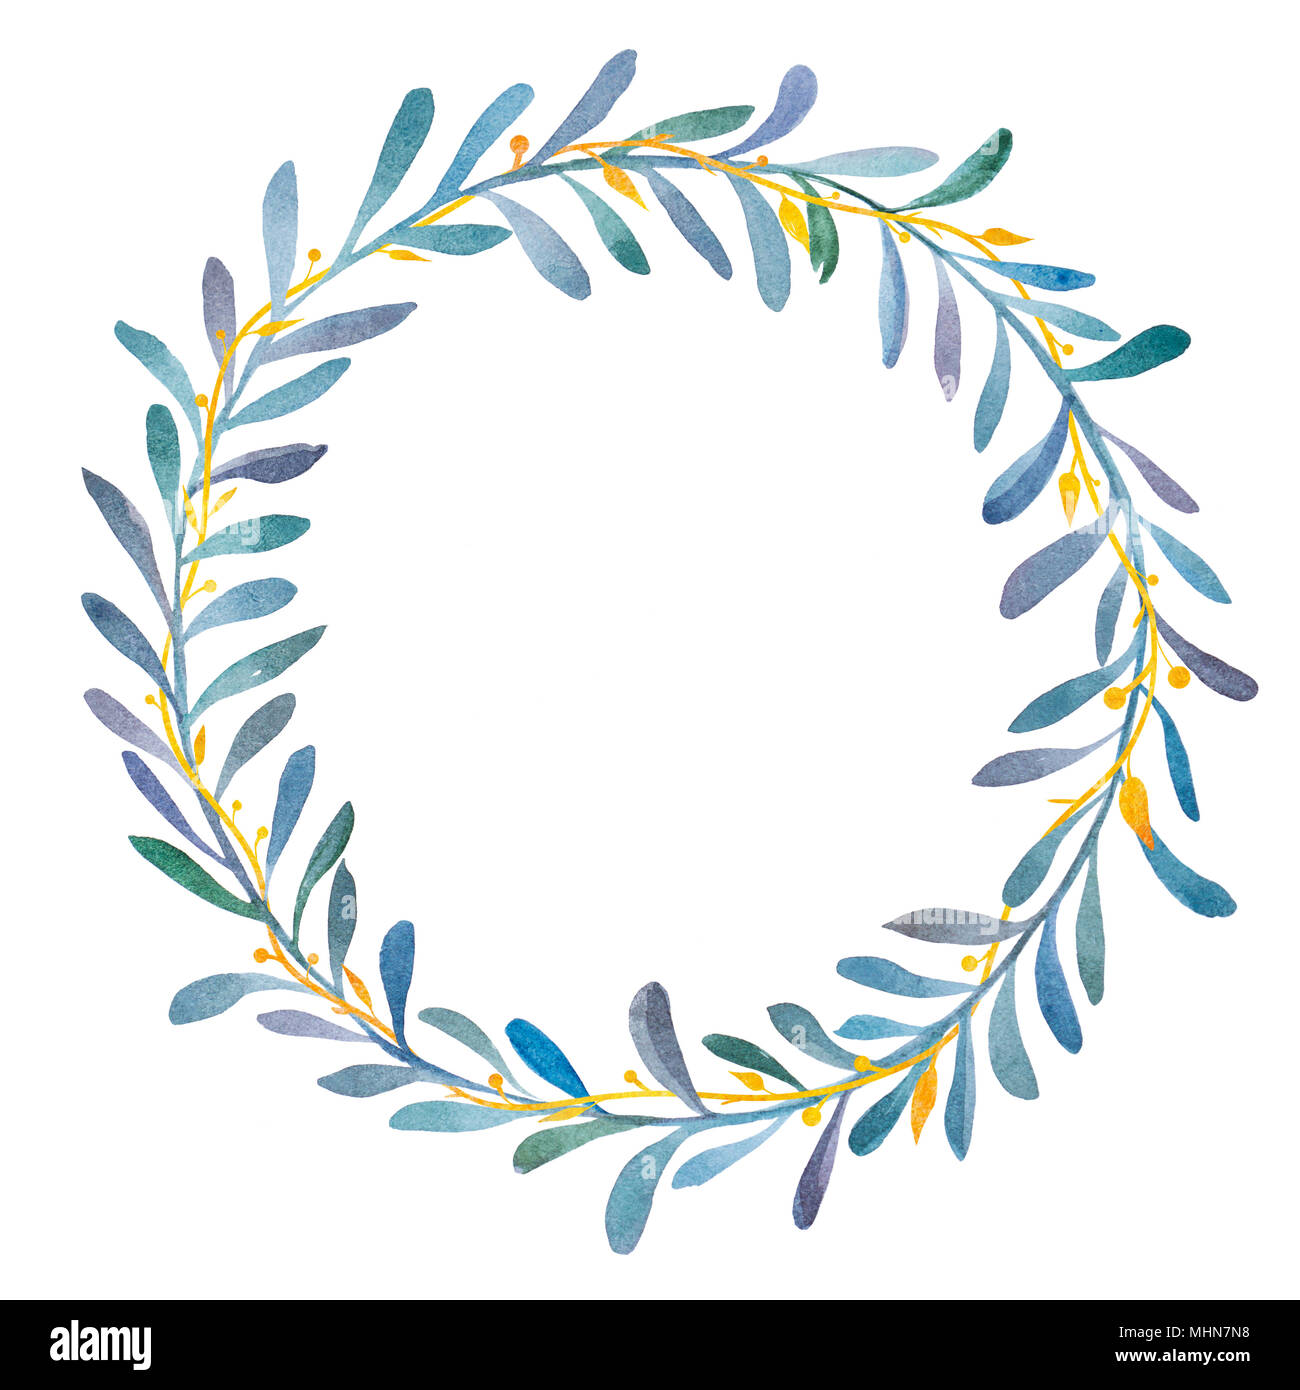 Hand drawn watercolor illustration of blue olives wreaths with gold branch. Round graphic elements for wedding branding, invitations, gift card. Stock Photo